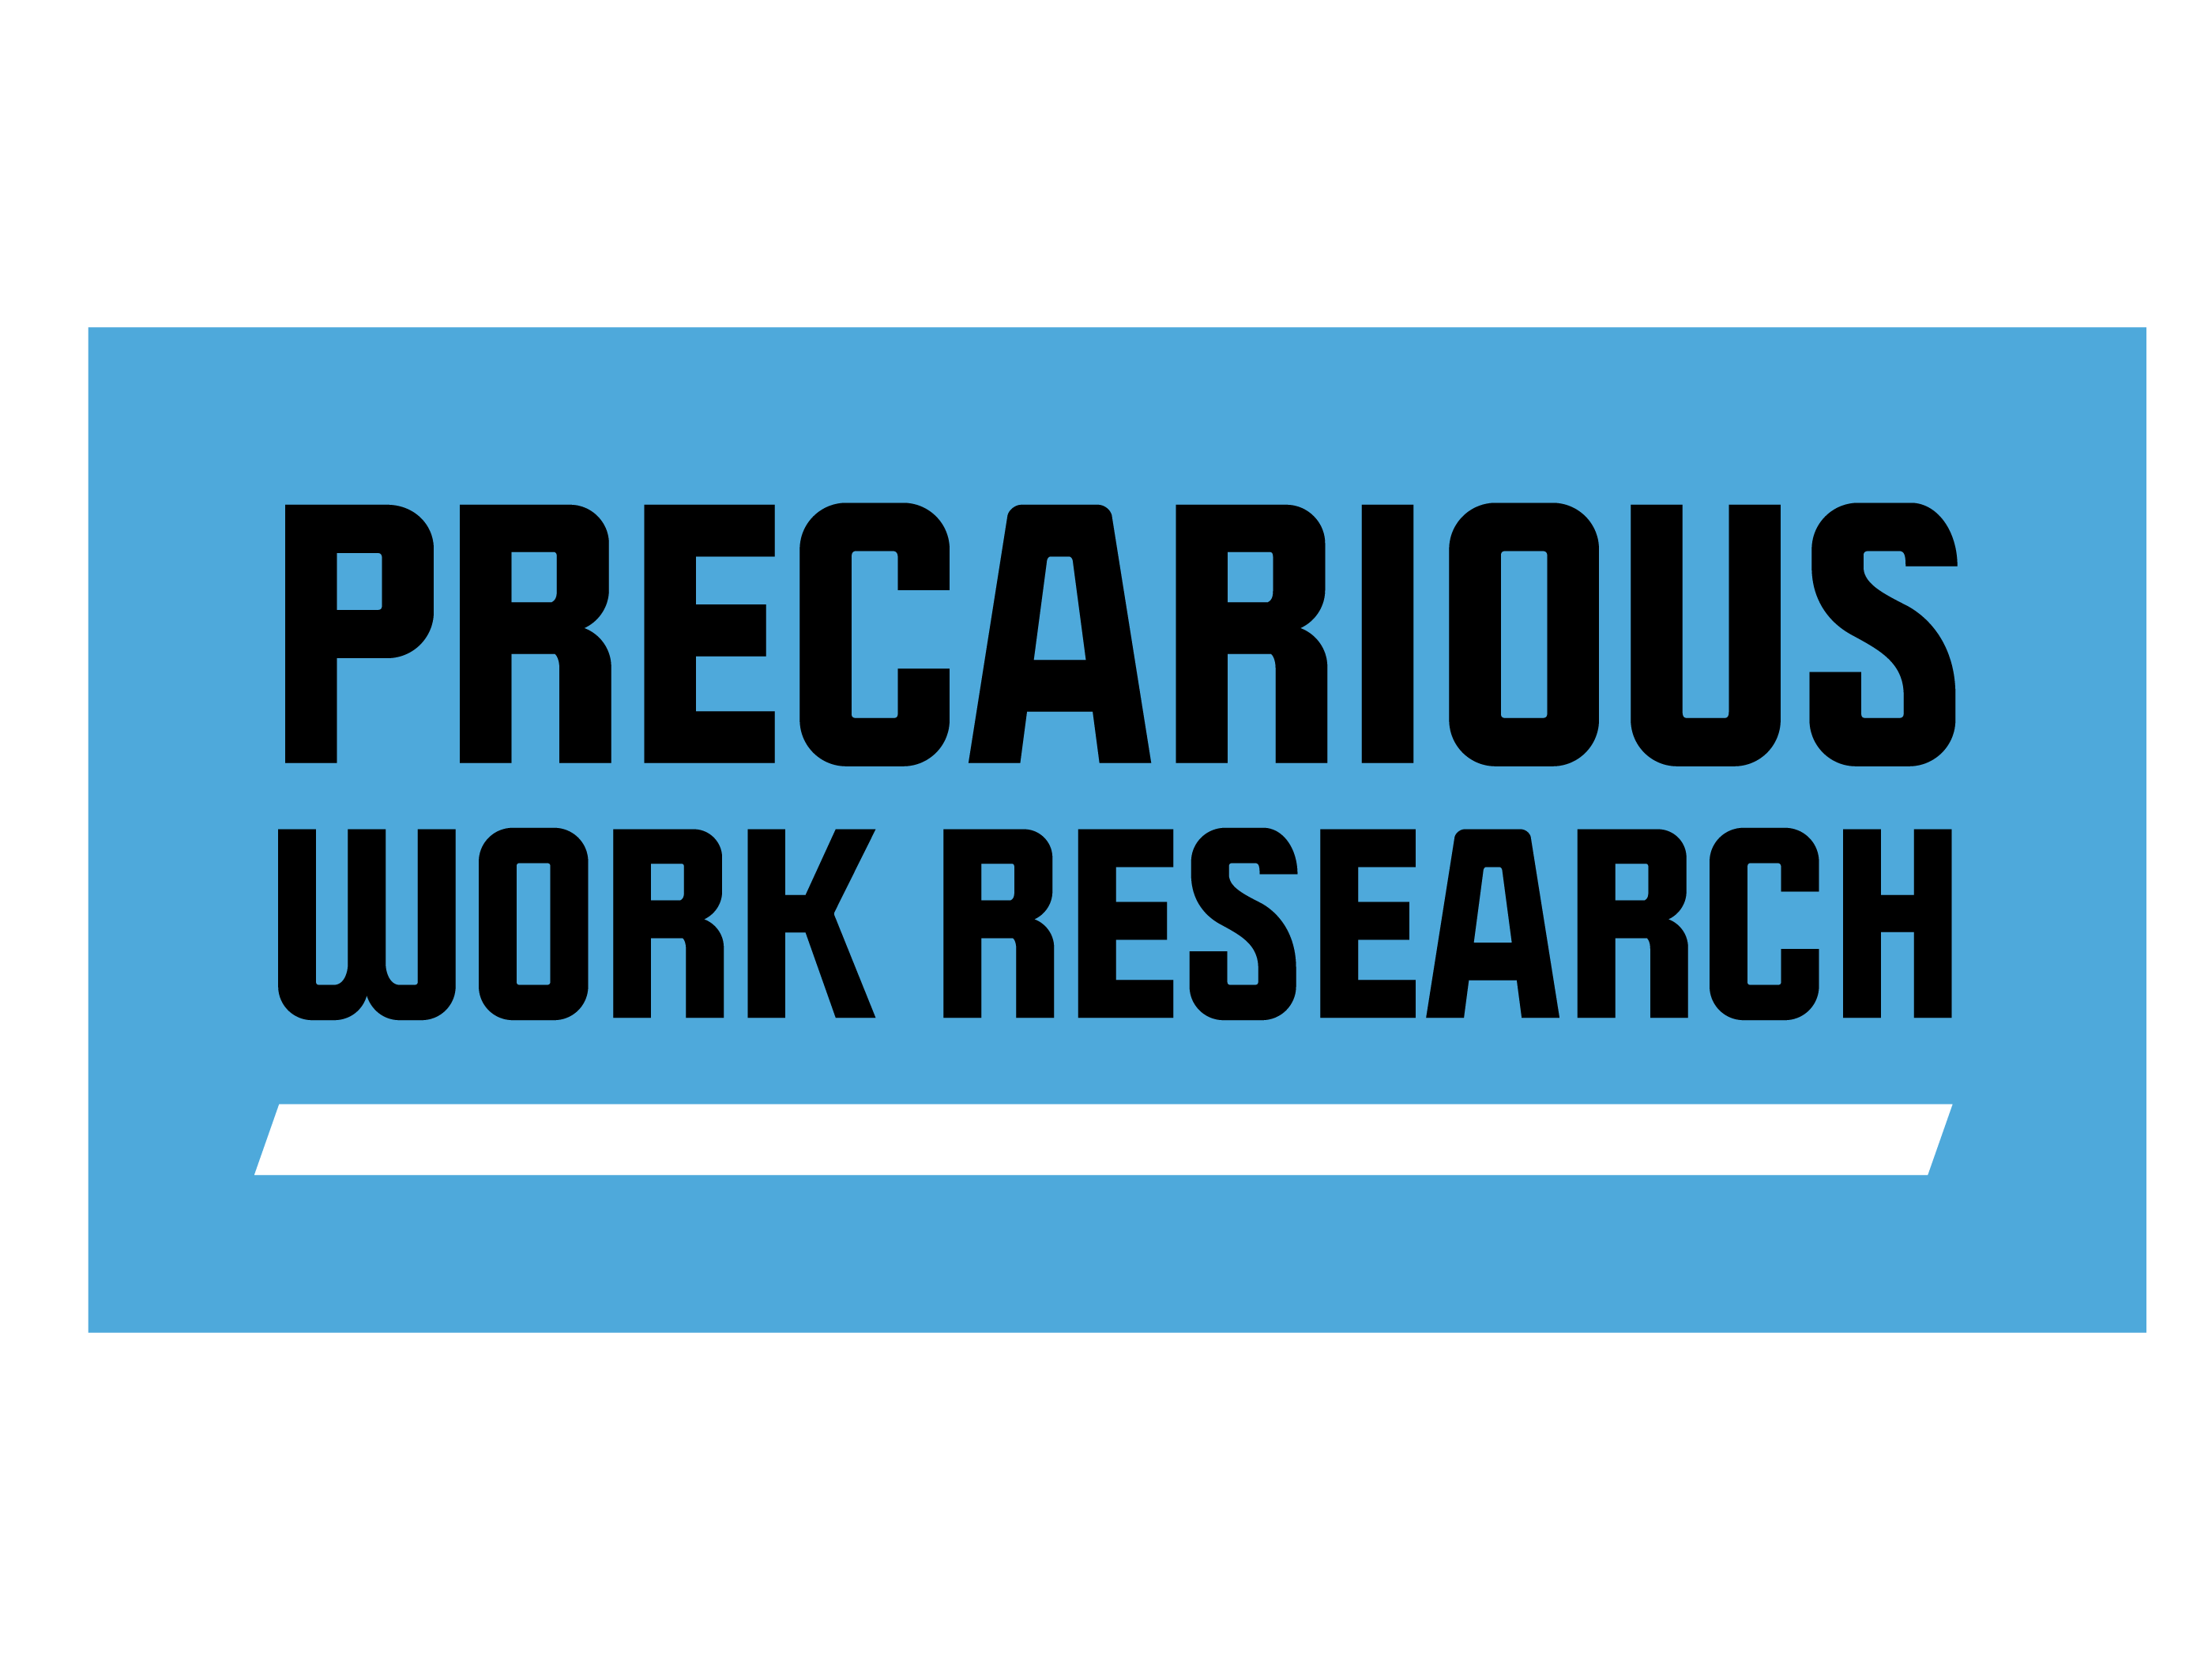 Precarious Research Workers